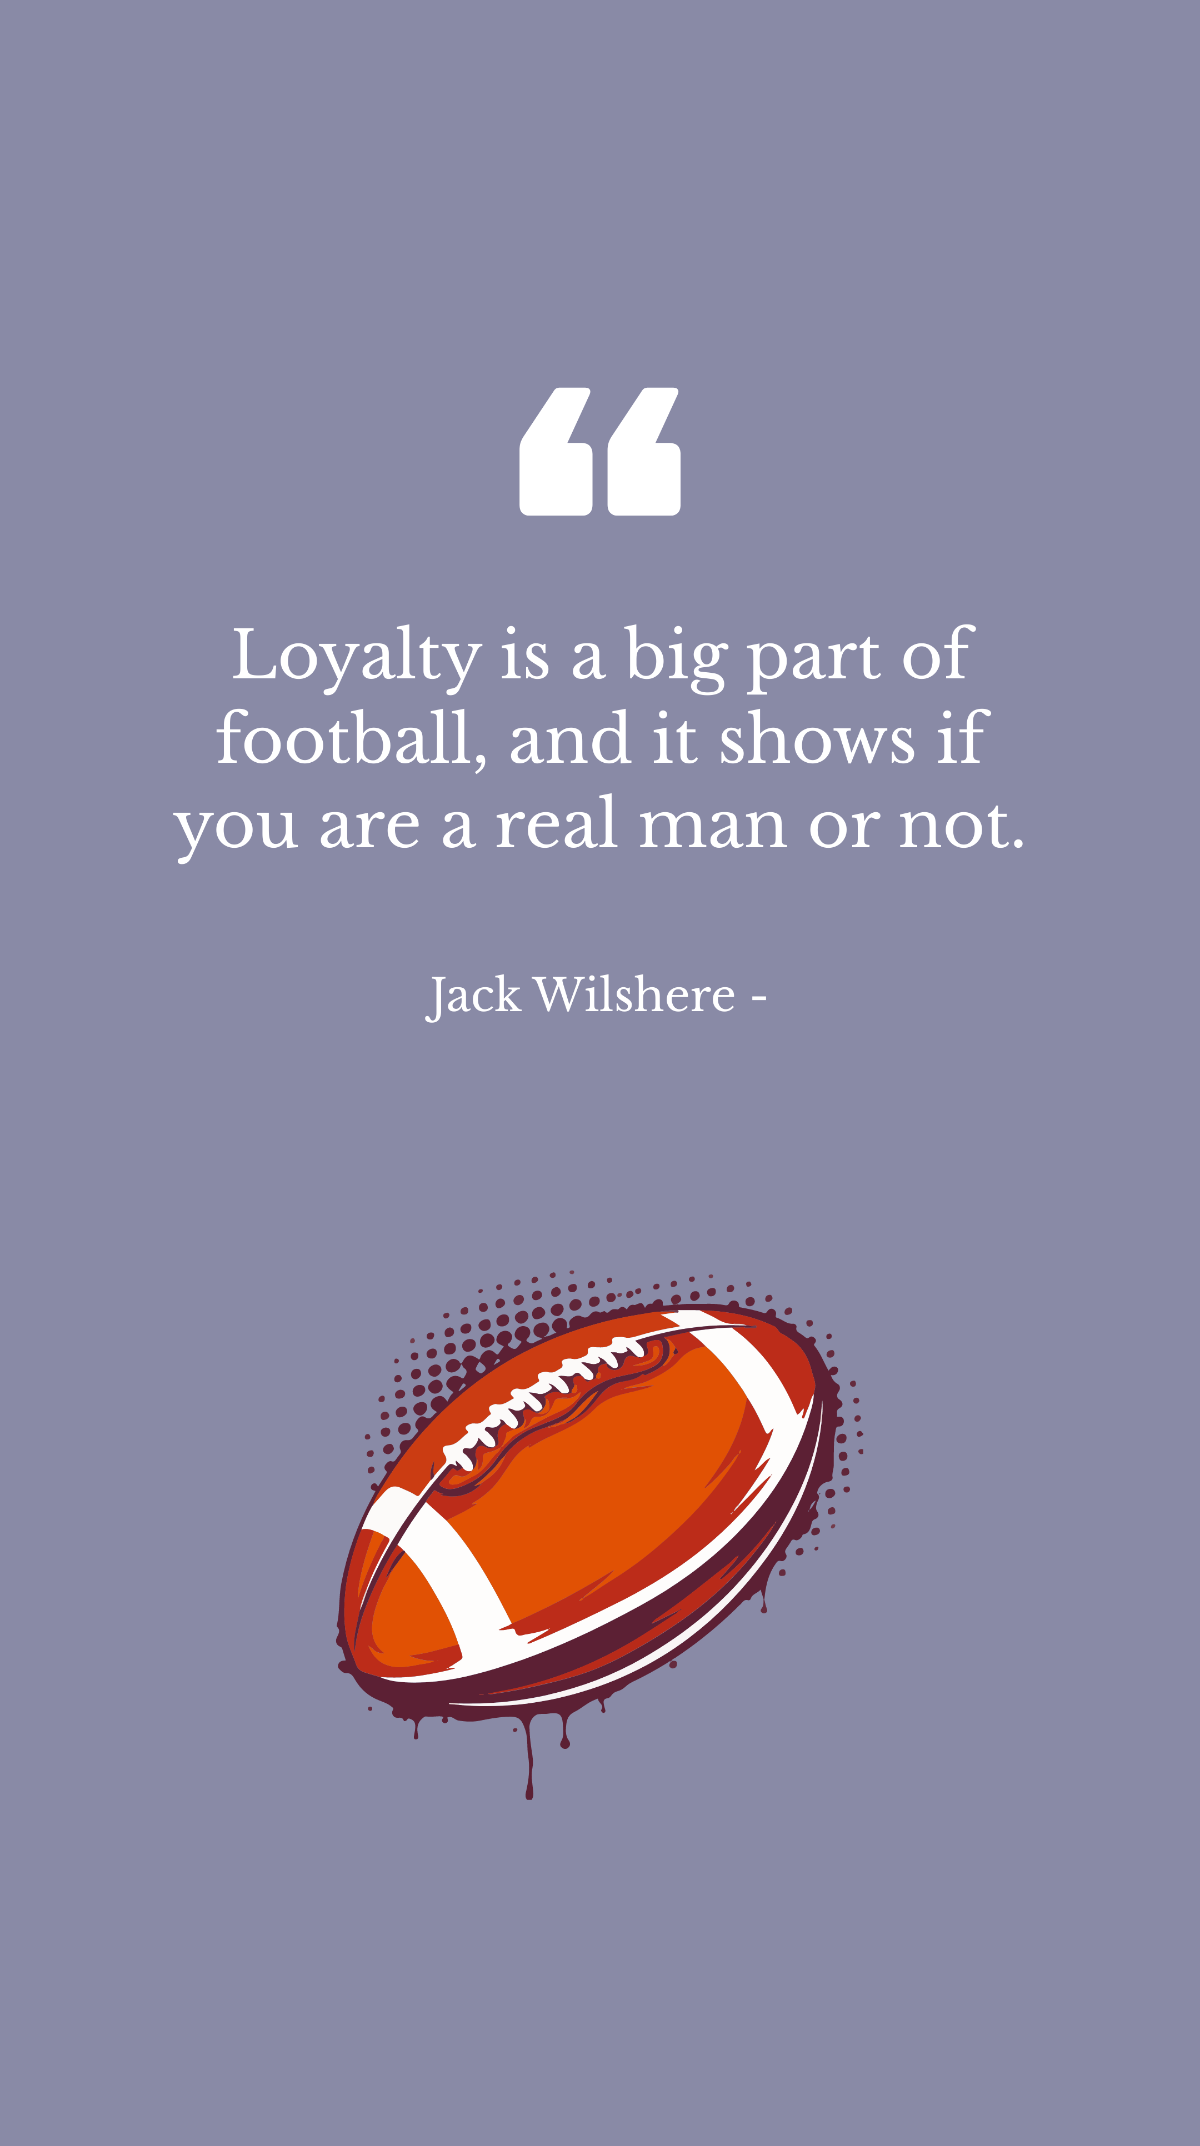 Free Jack Wilshere - Loyalty is a big part of football, and it shows if you are a real man or not. Template